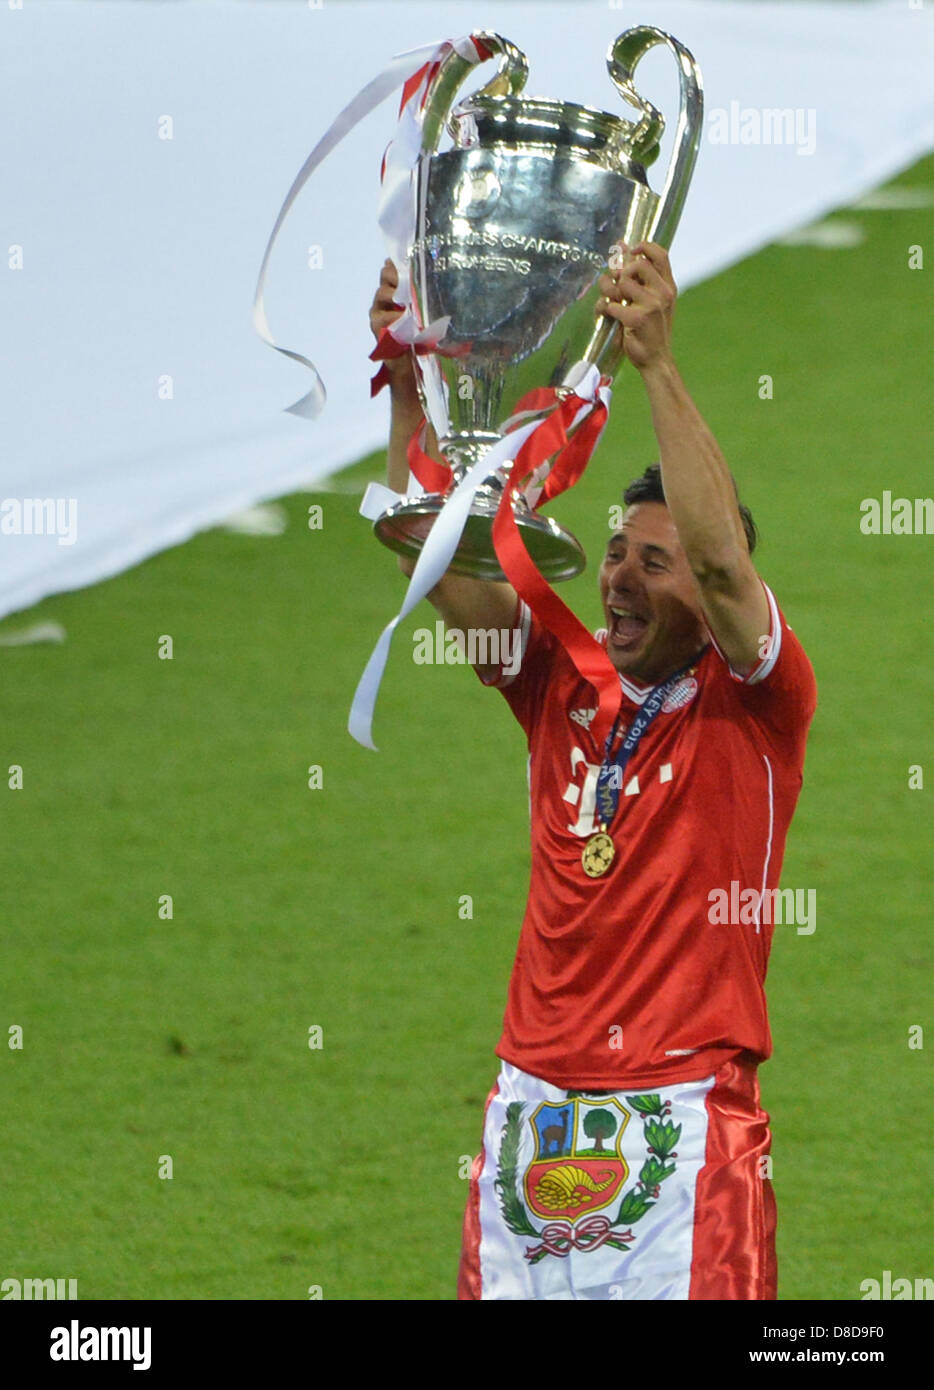 Munich's Claudio Pizarro (C) lifts the trophy after winning the UEFA soccer Champions  League final between Borussia Dortmund and Bayern Munich at Wembley stadium  in London, England, 25 May 2013. Photo: Peter